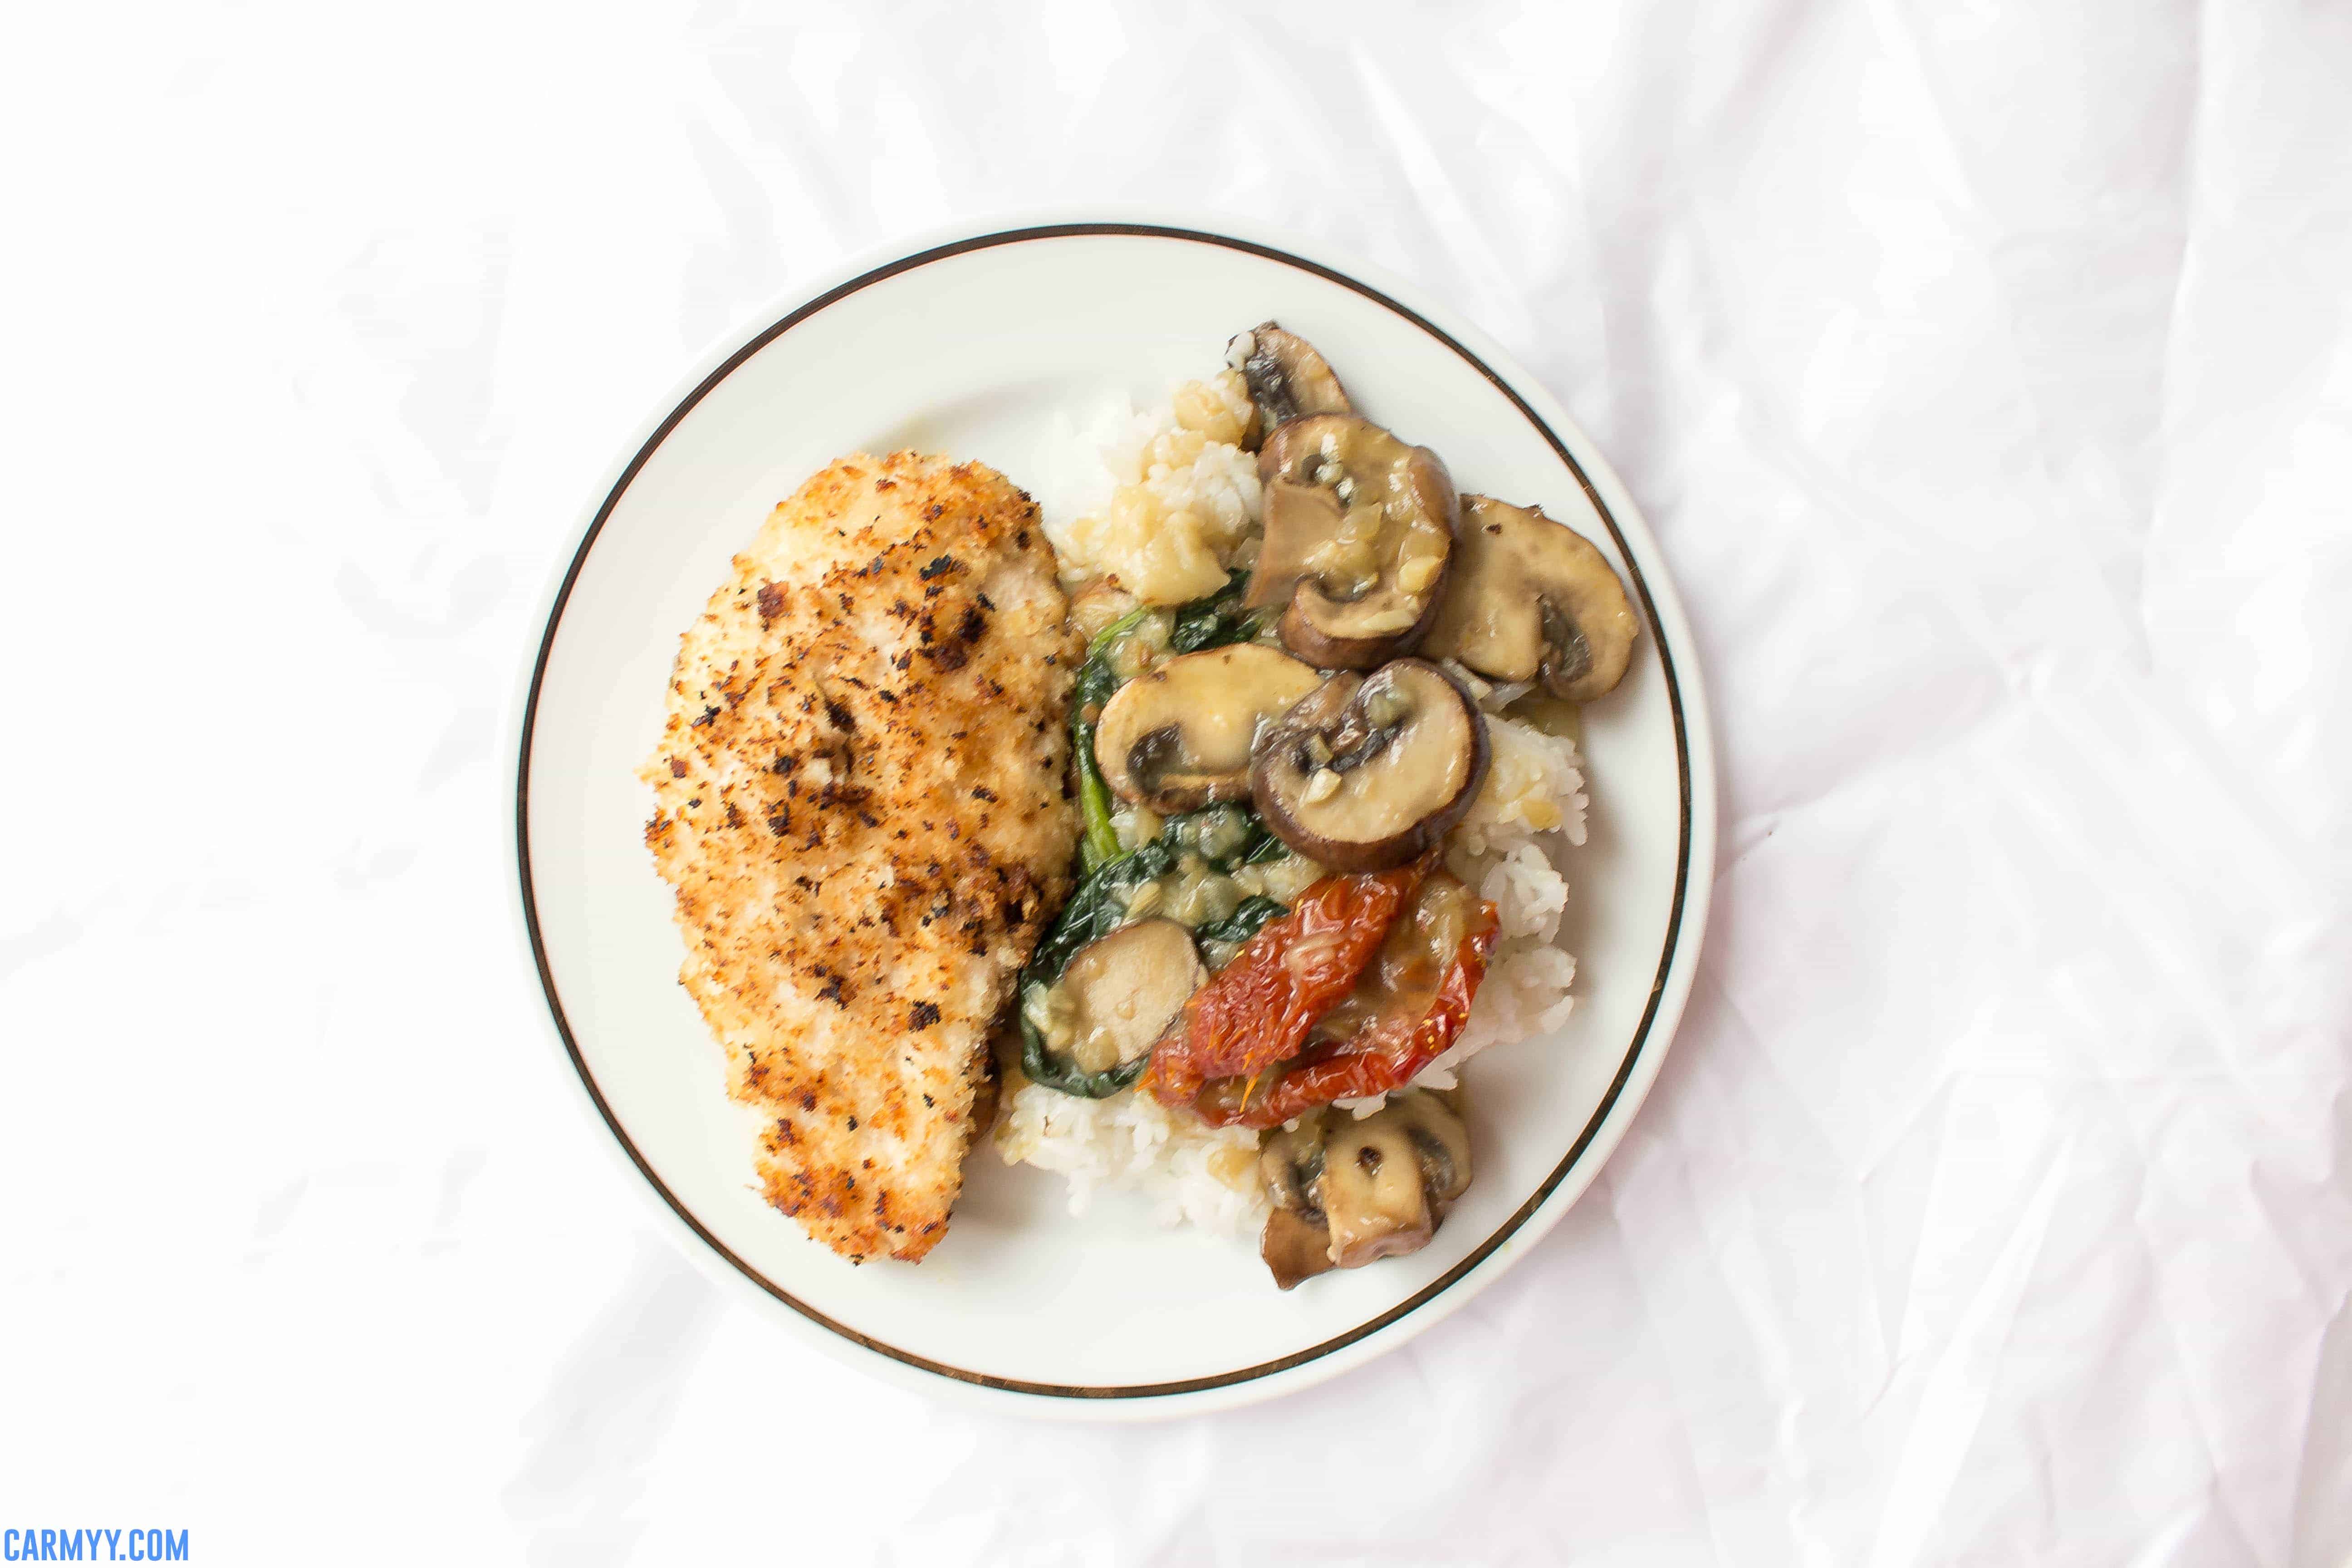 This creamy one pot chicken is made with no cream and packed with flavour! Made with a base of mushroom, spinach, and sun dried tomato, this creamy one pot chicken is the perfect recipe for a lazy dinner under an hour.